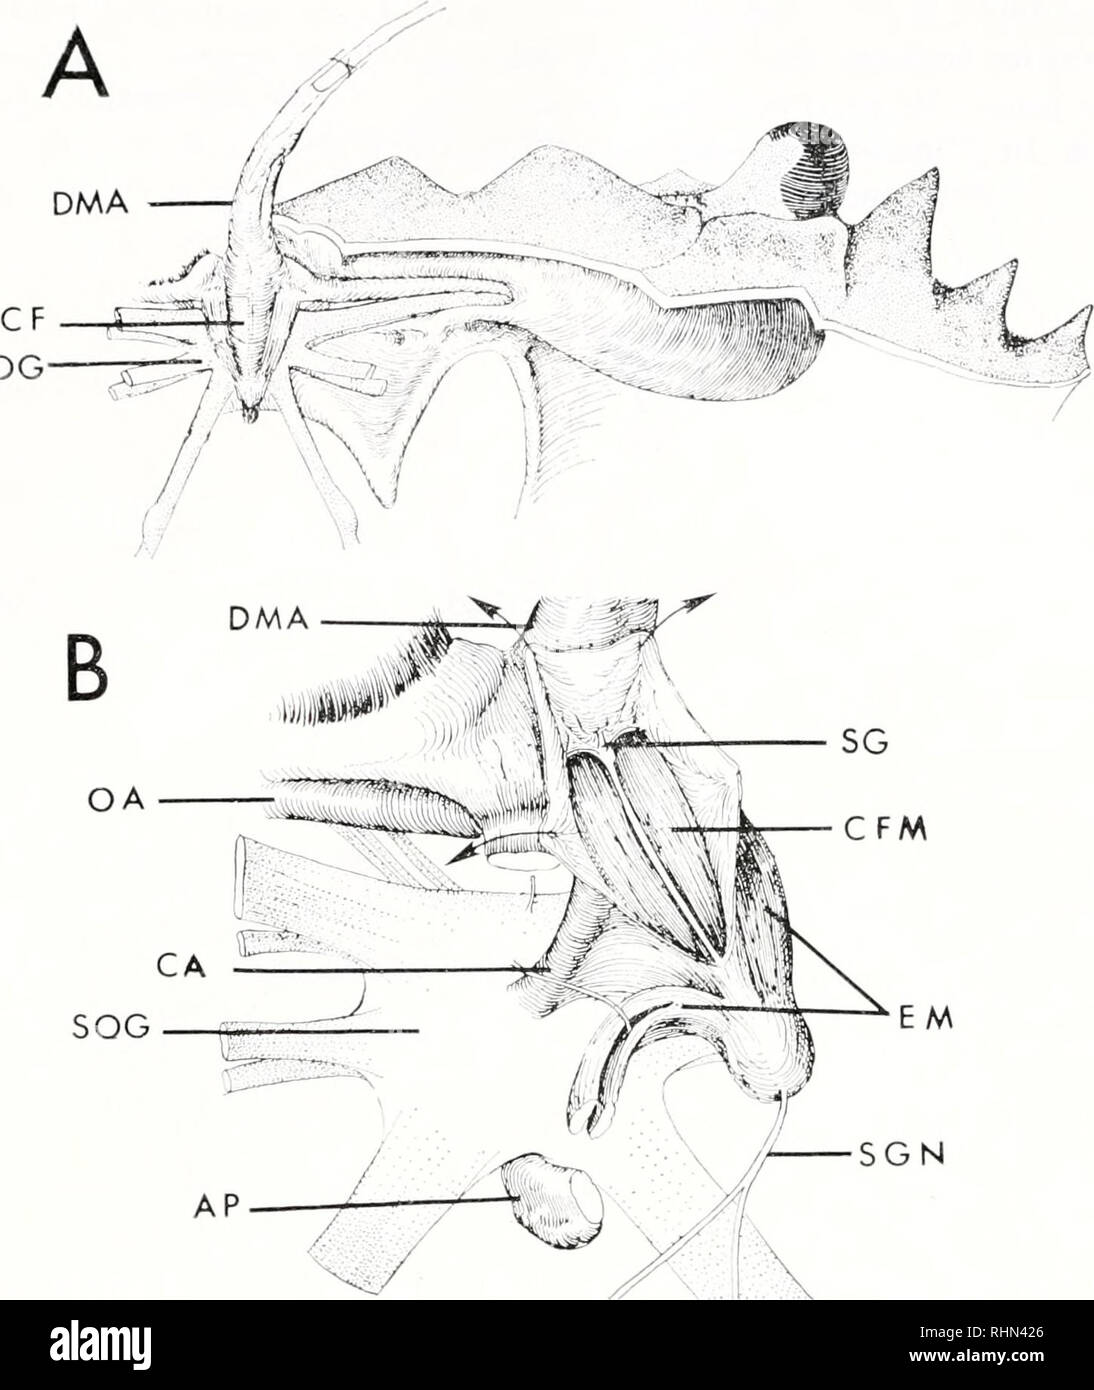 . The Biological bulletin. Biology; Zoology; Biology; Marine Biology. 500 A. STEINACKER SOG. B SOG SGN AP FIGURE 3. Transverse view of the cor frontale in cephalothorax of the Callincctes sapidns. A shows relation of cor frontale (CF) to cephalic structures. DMA indicates dorsal median artery entering the cor frontale. Muscles bordering cor frontale (EM) are the eyestalk muscles. The supraesophageal ganglion (SOG) lies under the cor frontale and receives its blood supply via the cerebral artery (CA). B shows enlarged view of center of (A) showing the cor frontale sinus walls opened at arrows t Stock Photo